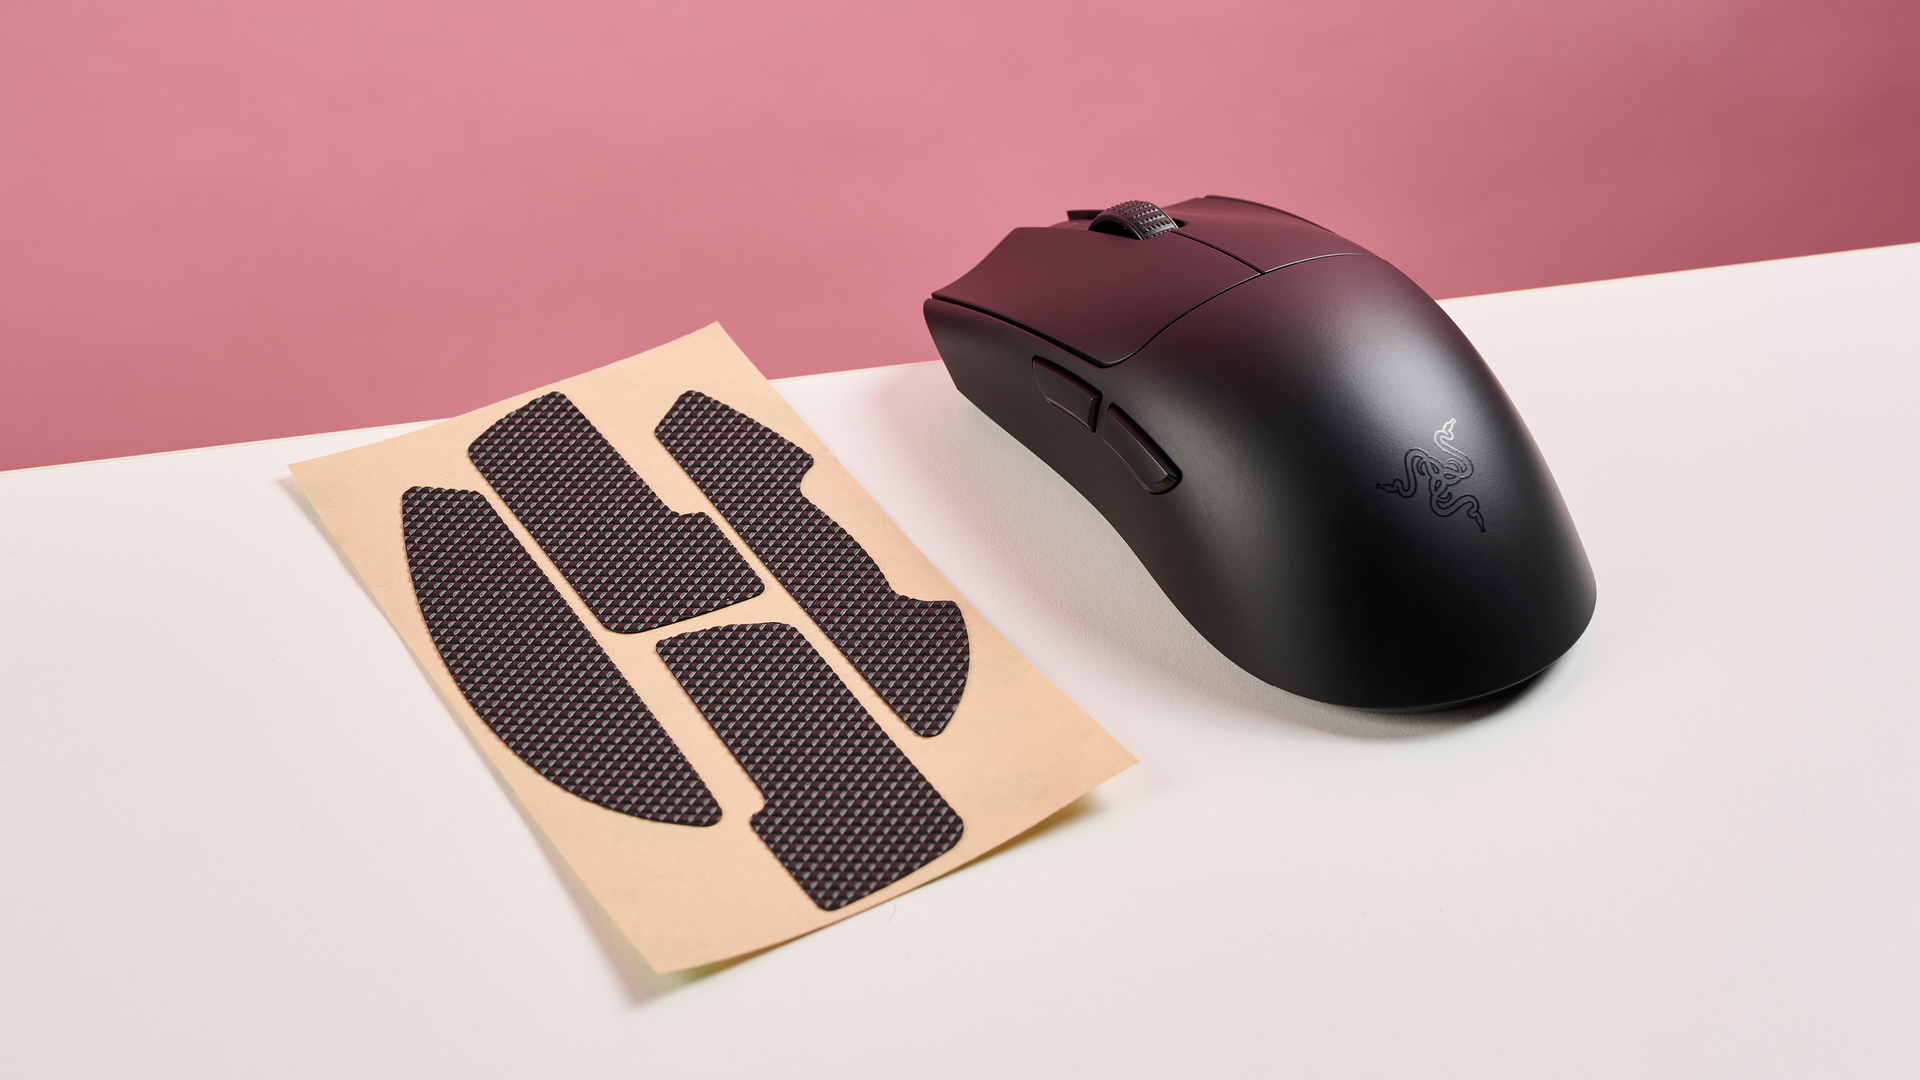 Razer Viper V3 Pro gaming mouse and grip tape